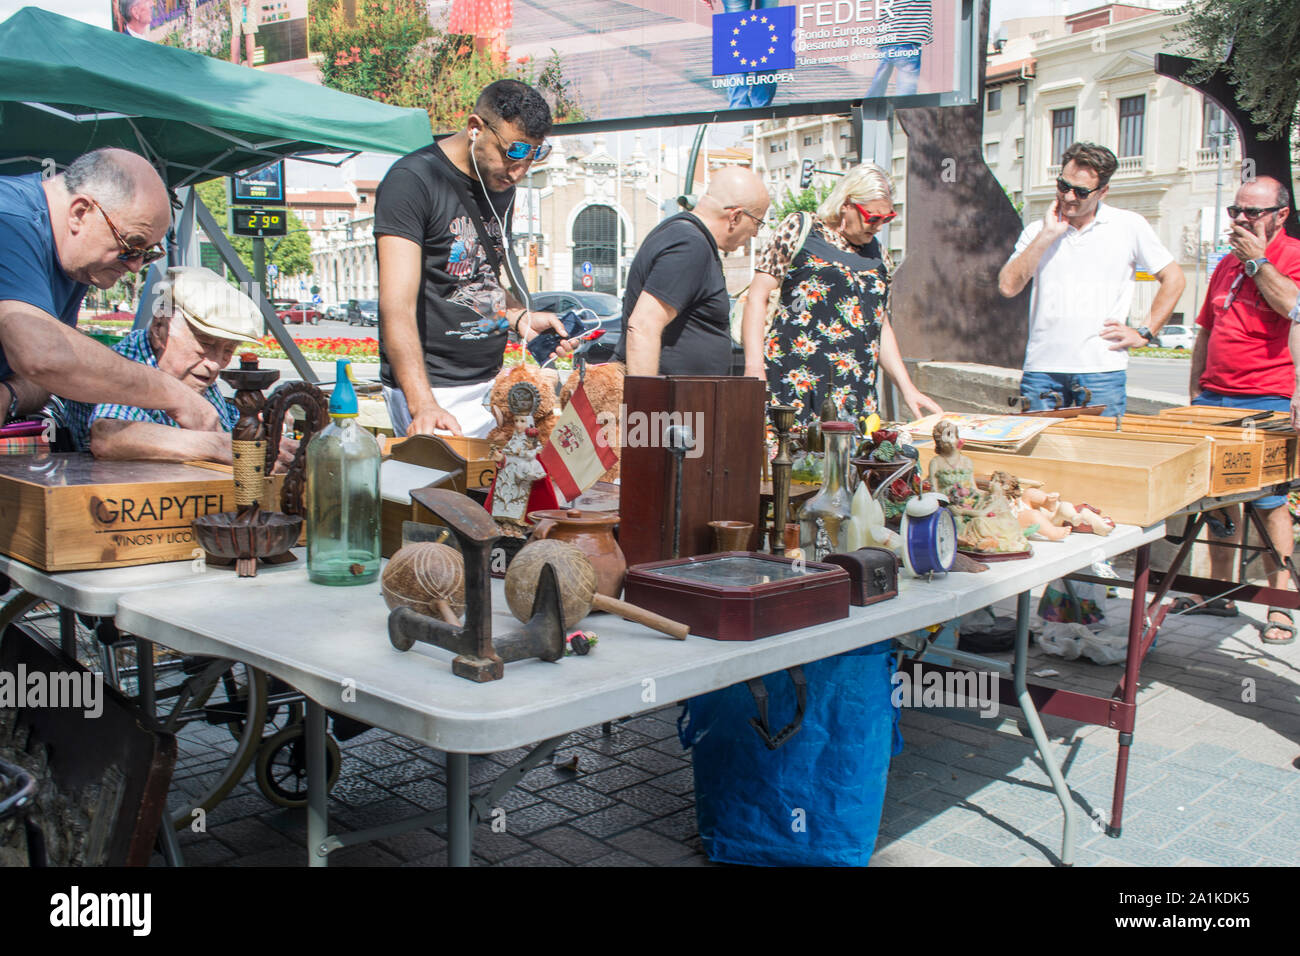 Shopper around the stalls on a street market during the Feria in the city of Murcia Spain Stock Photo